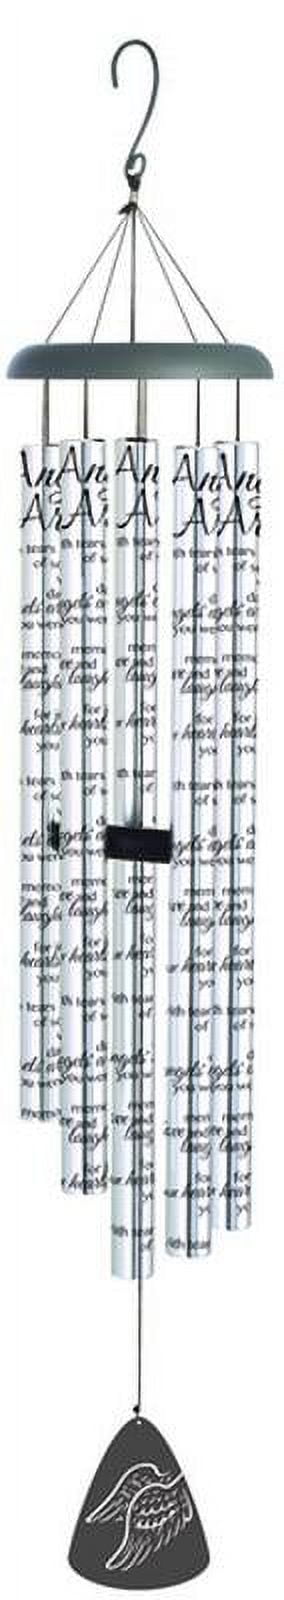 14813x 55 In. Wind Chime Sonnet Angels Arms, Silver & Black